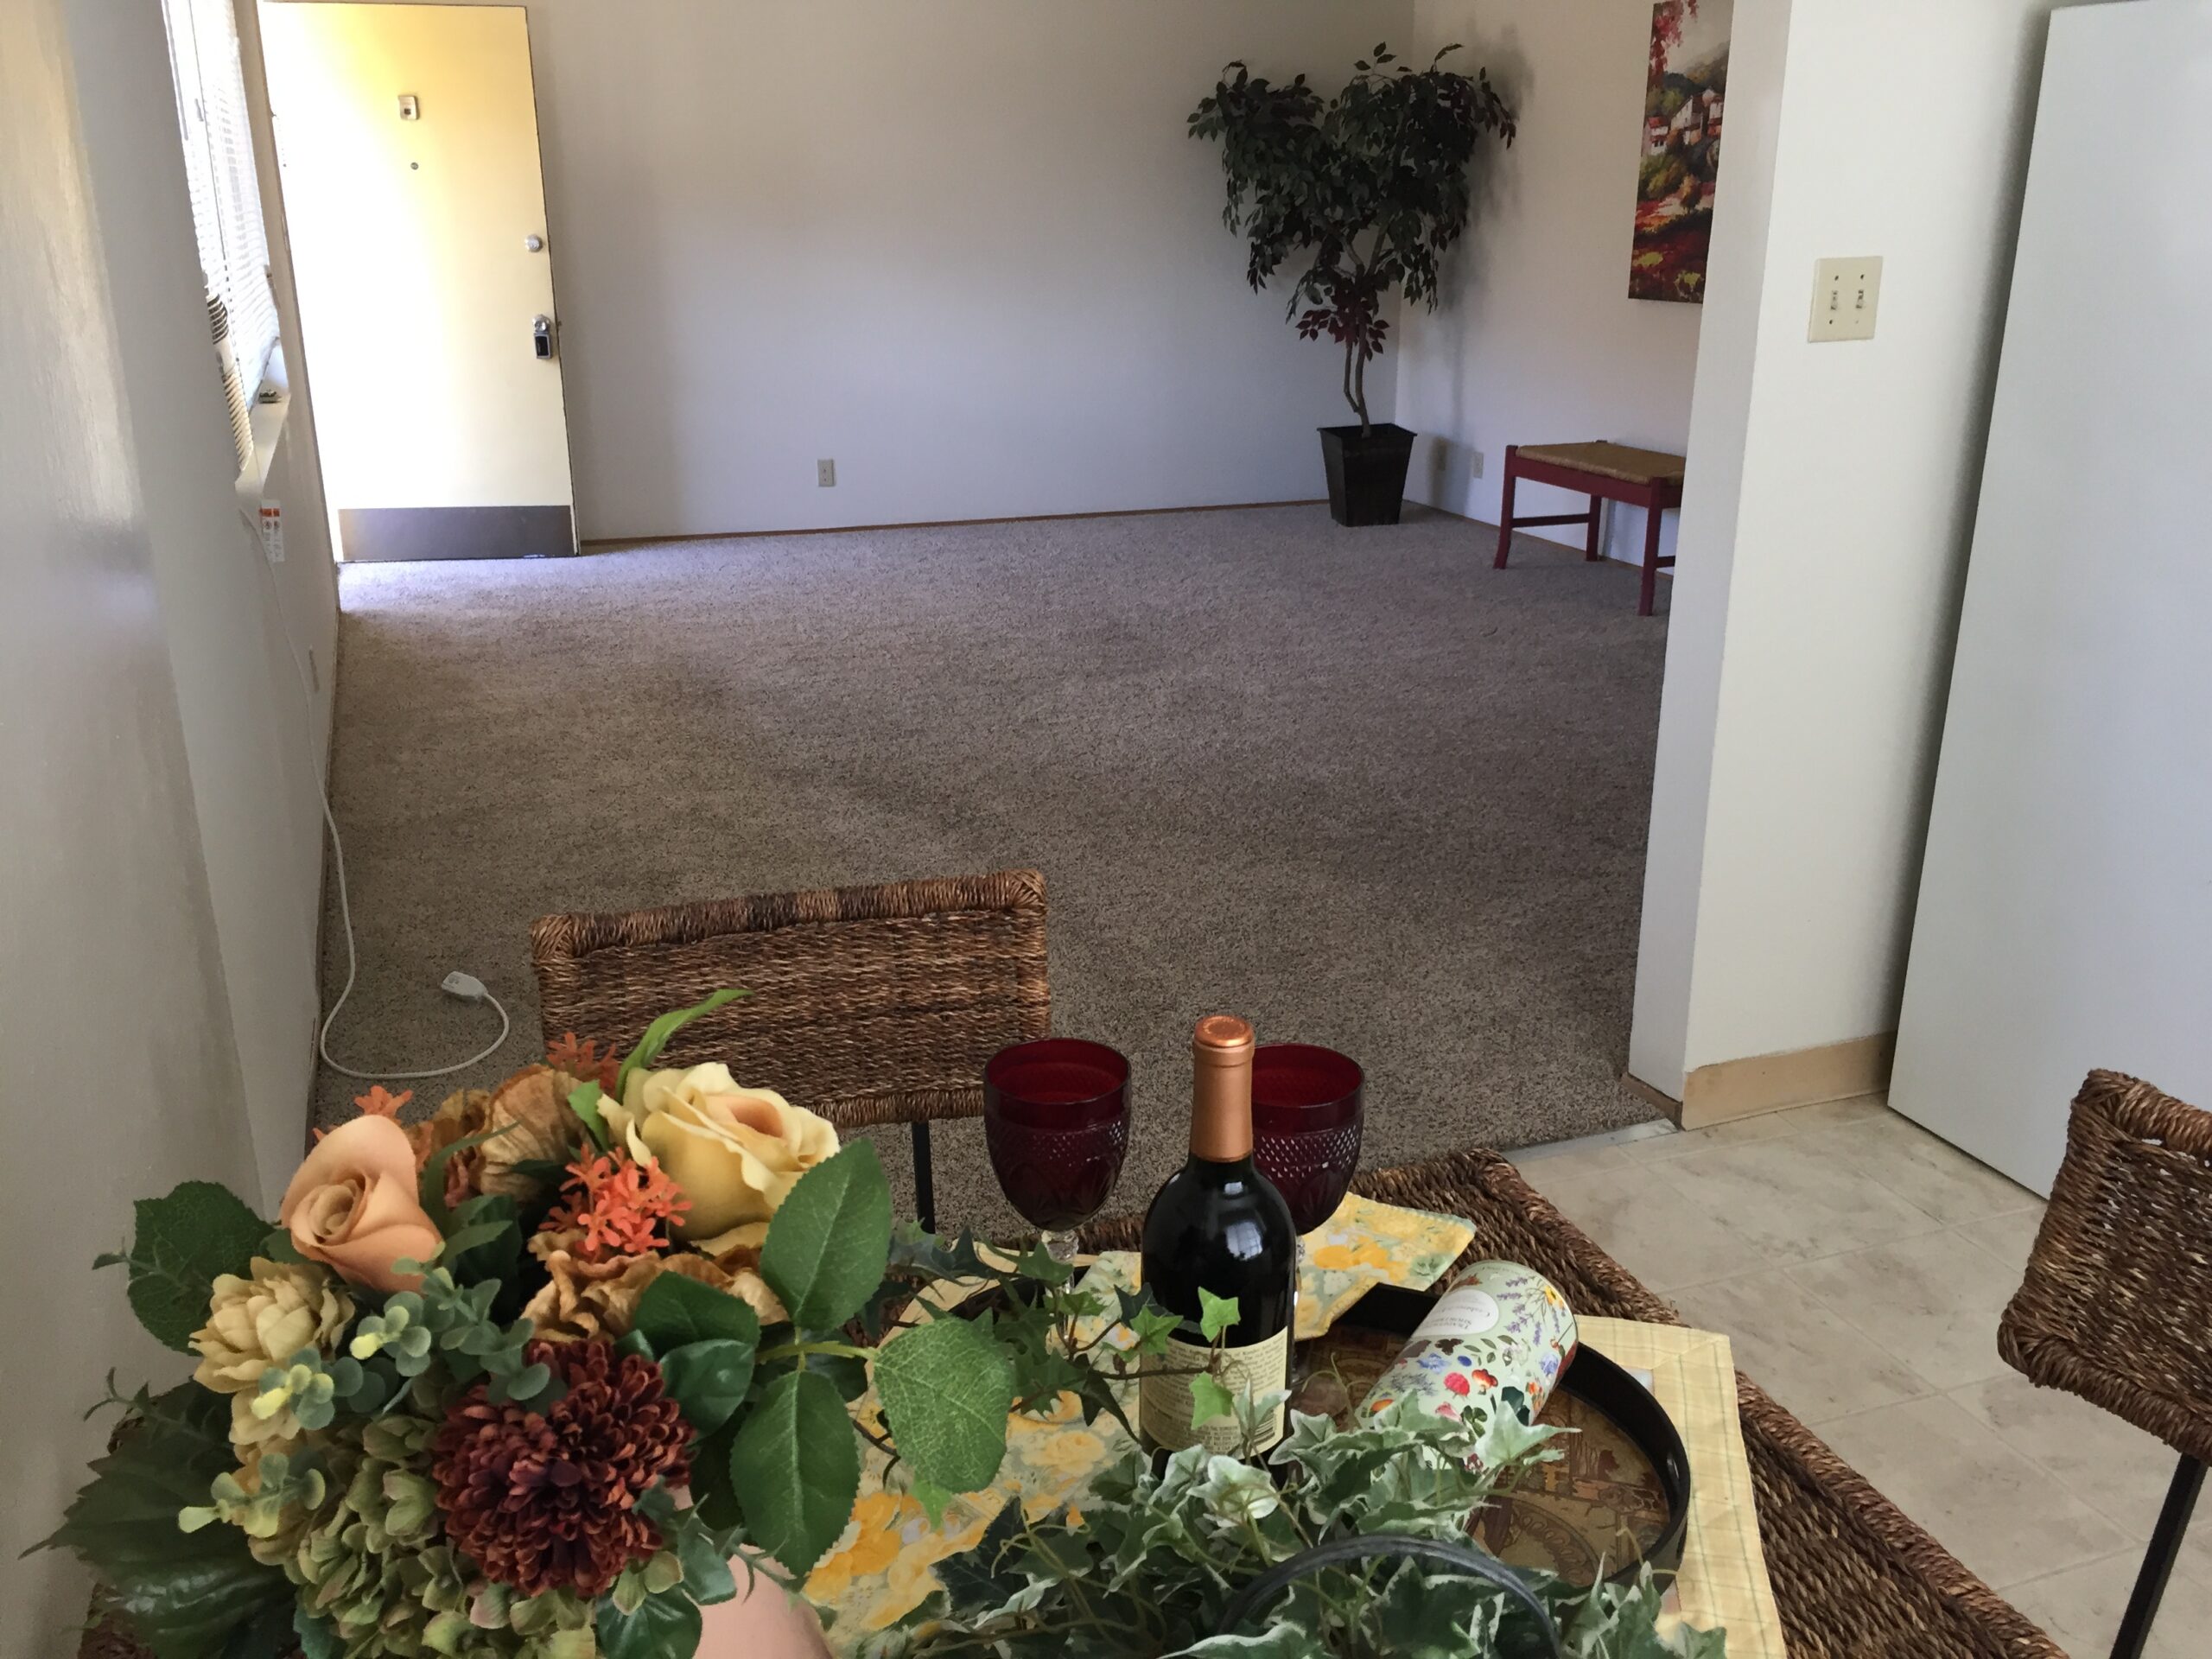 A room with flowers and wine on the table